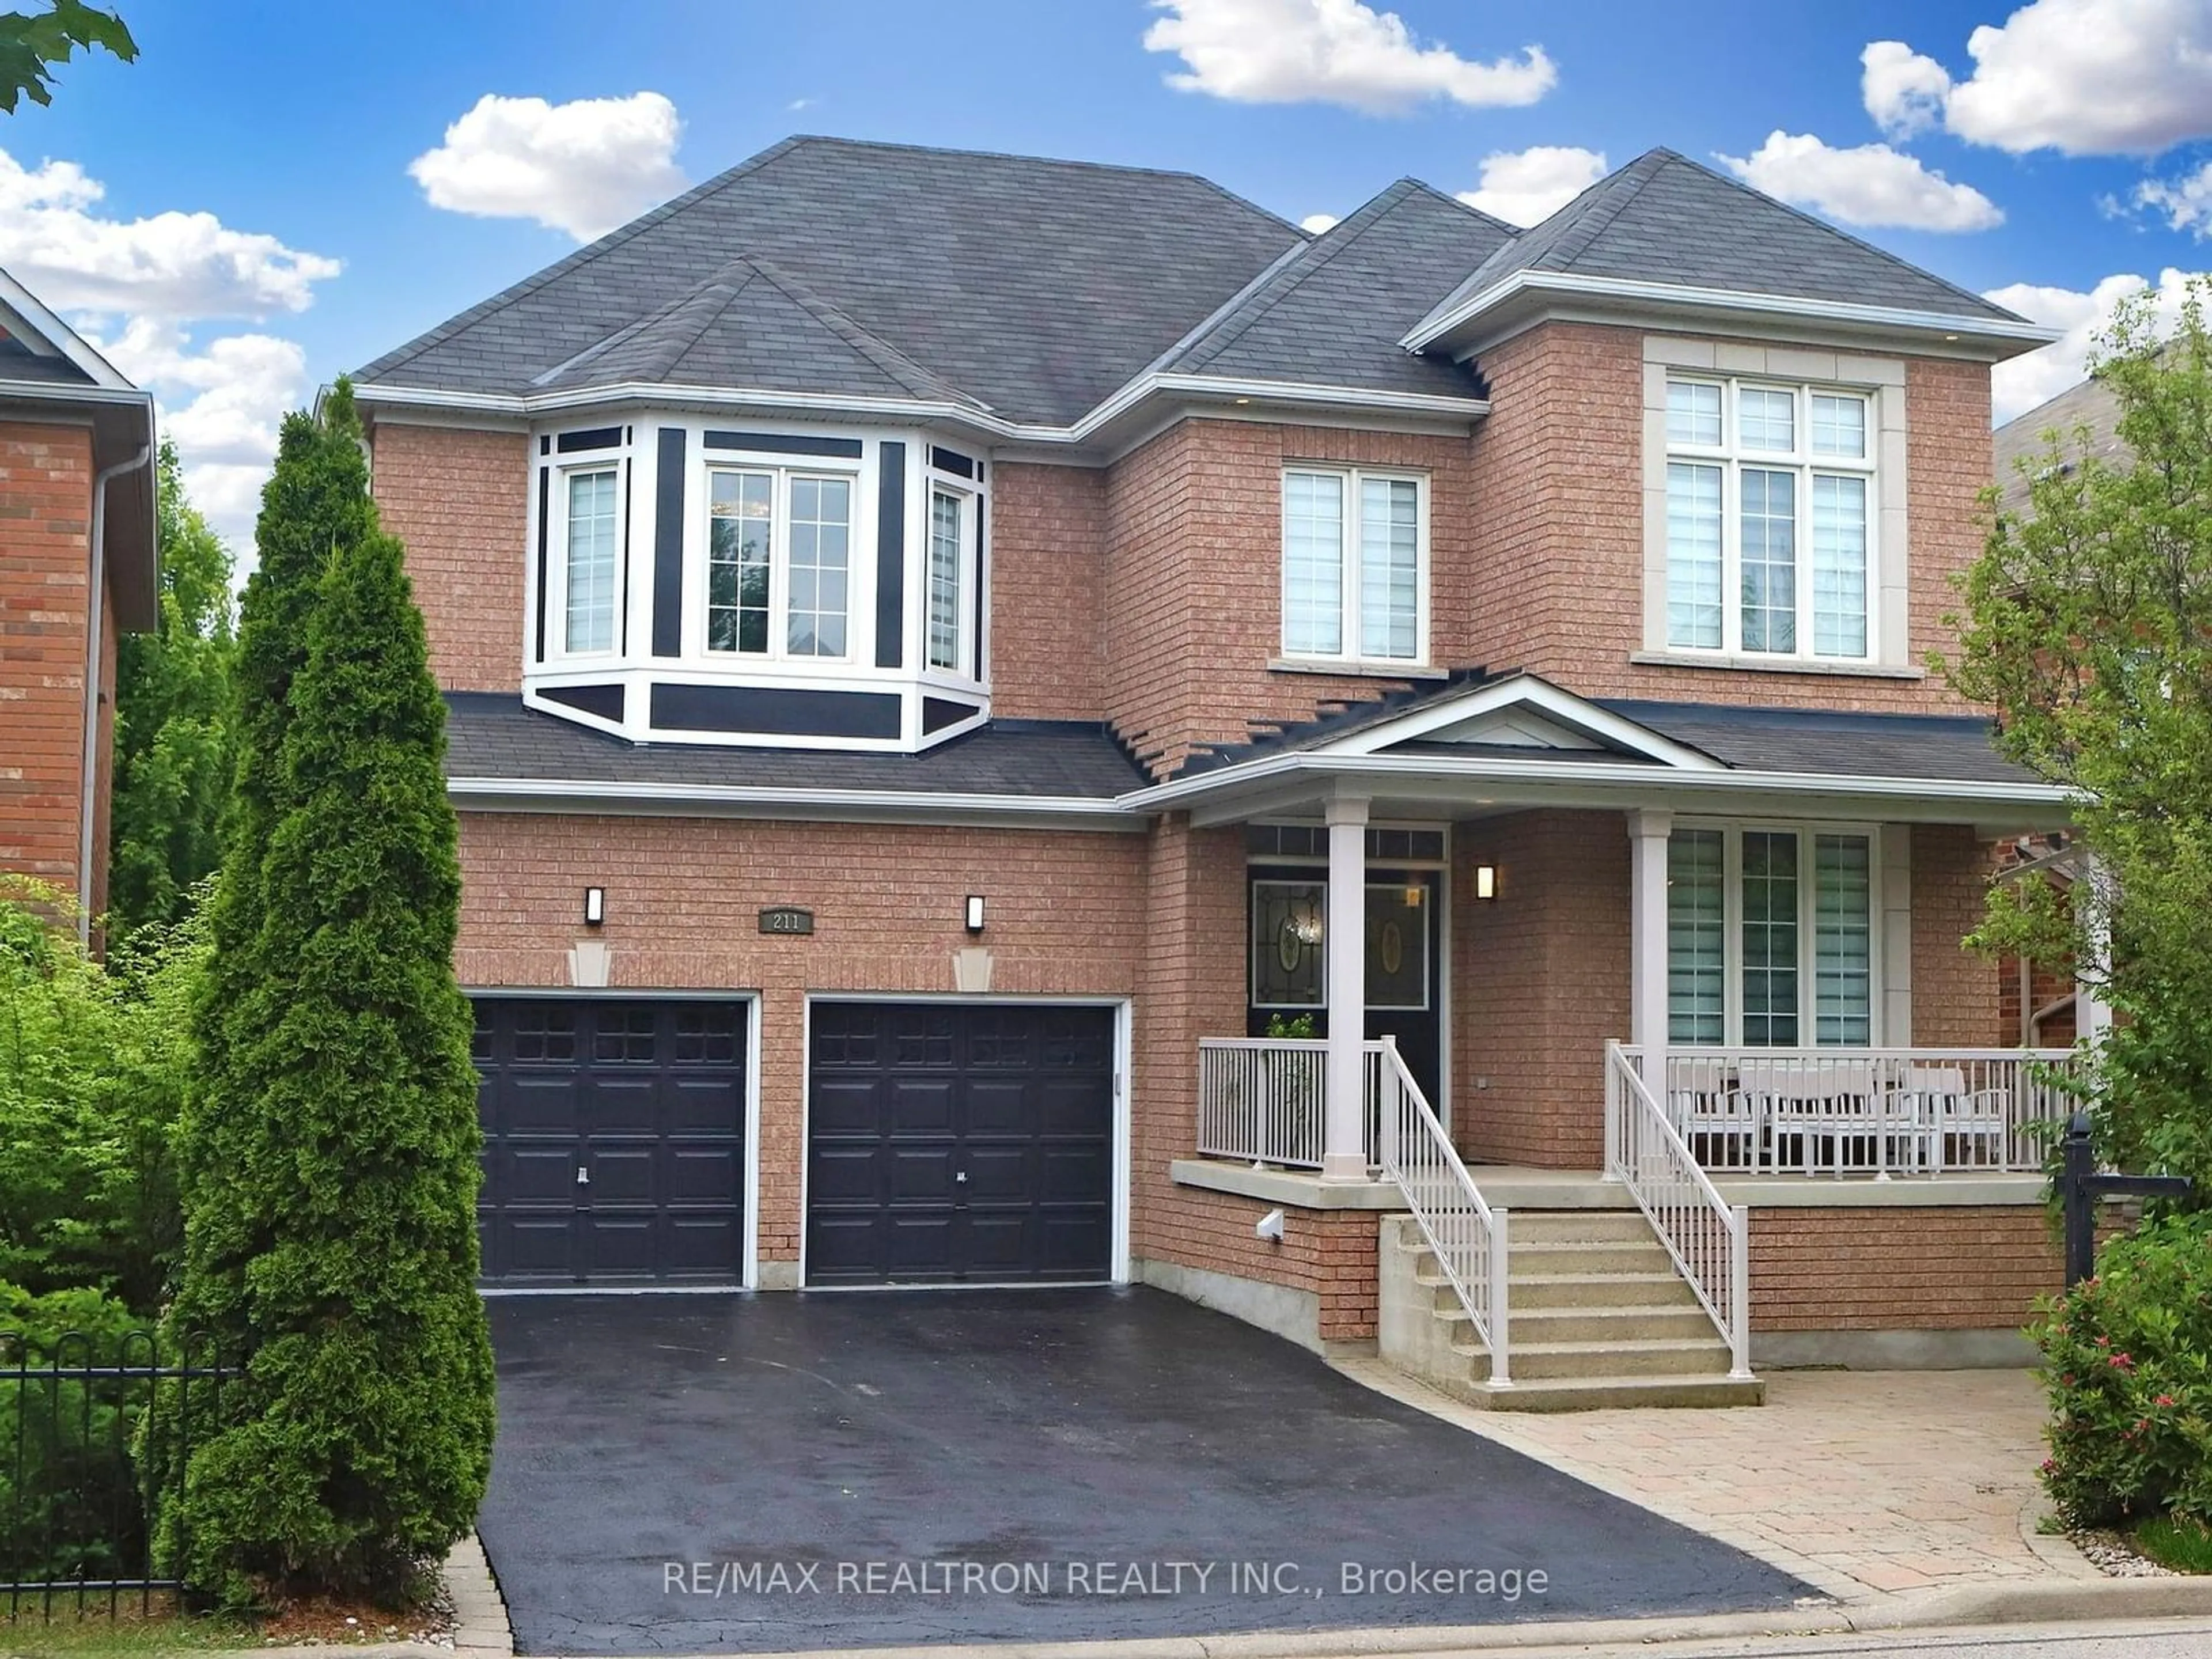 Home with brick exterior material for 211 Seabreeze Ave, Vaughan Ontario L4J 9H2